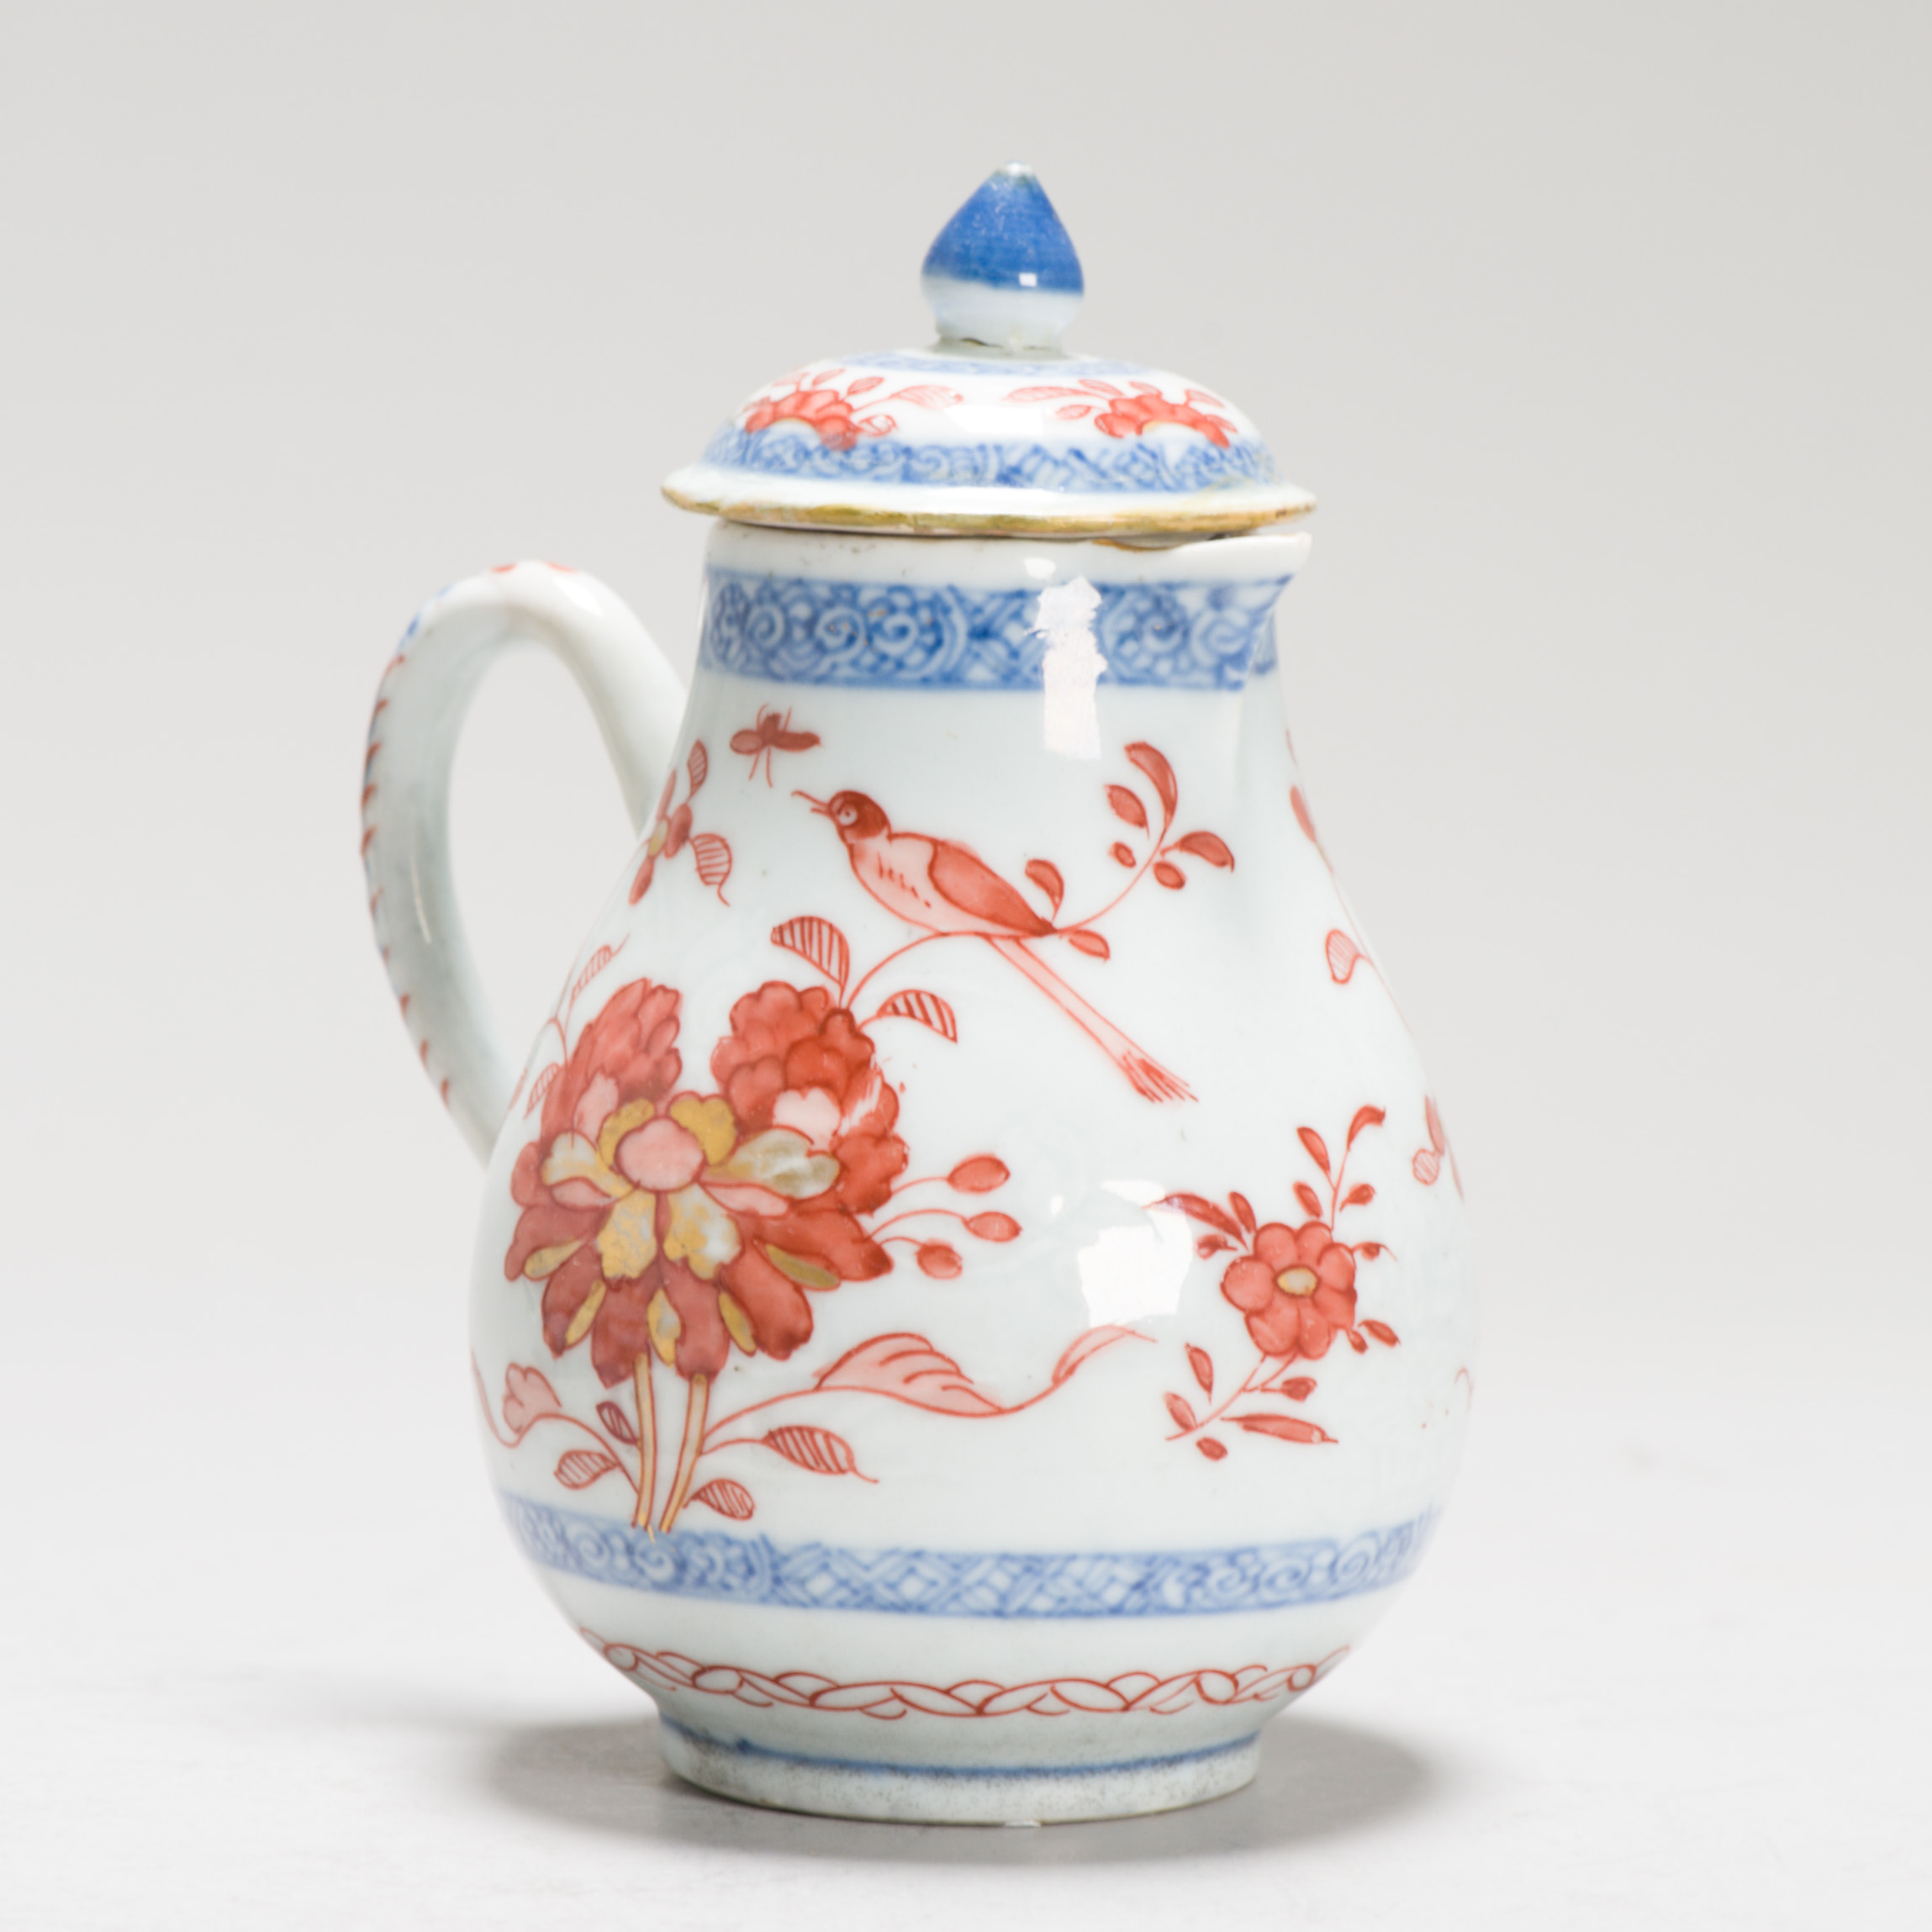 1247 A Lovely Chinese Creamer from A Teaset, decorated in red in Europe on a Chinese blue and white piece